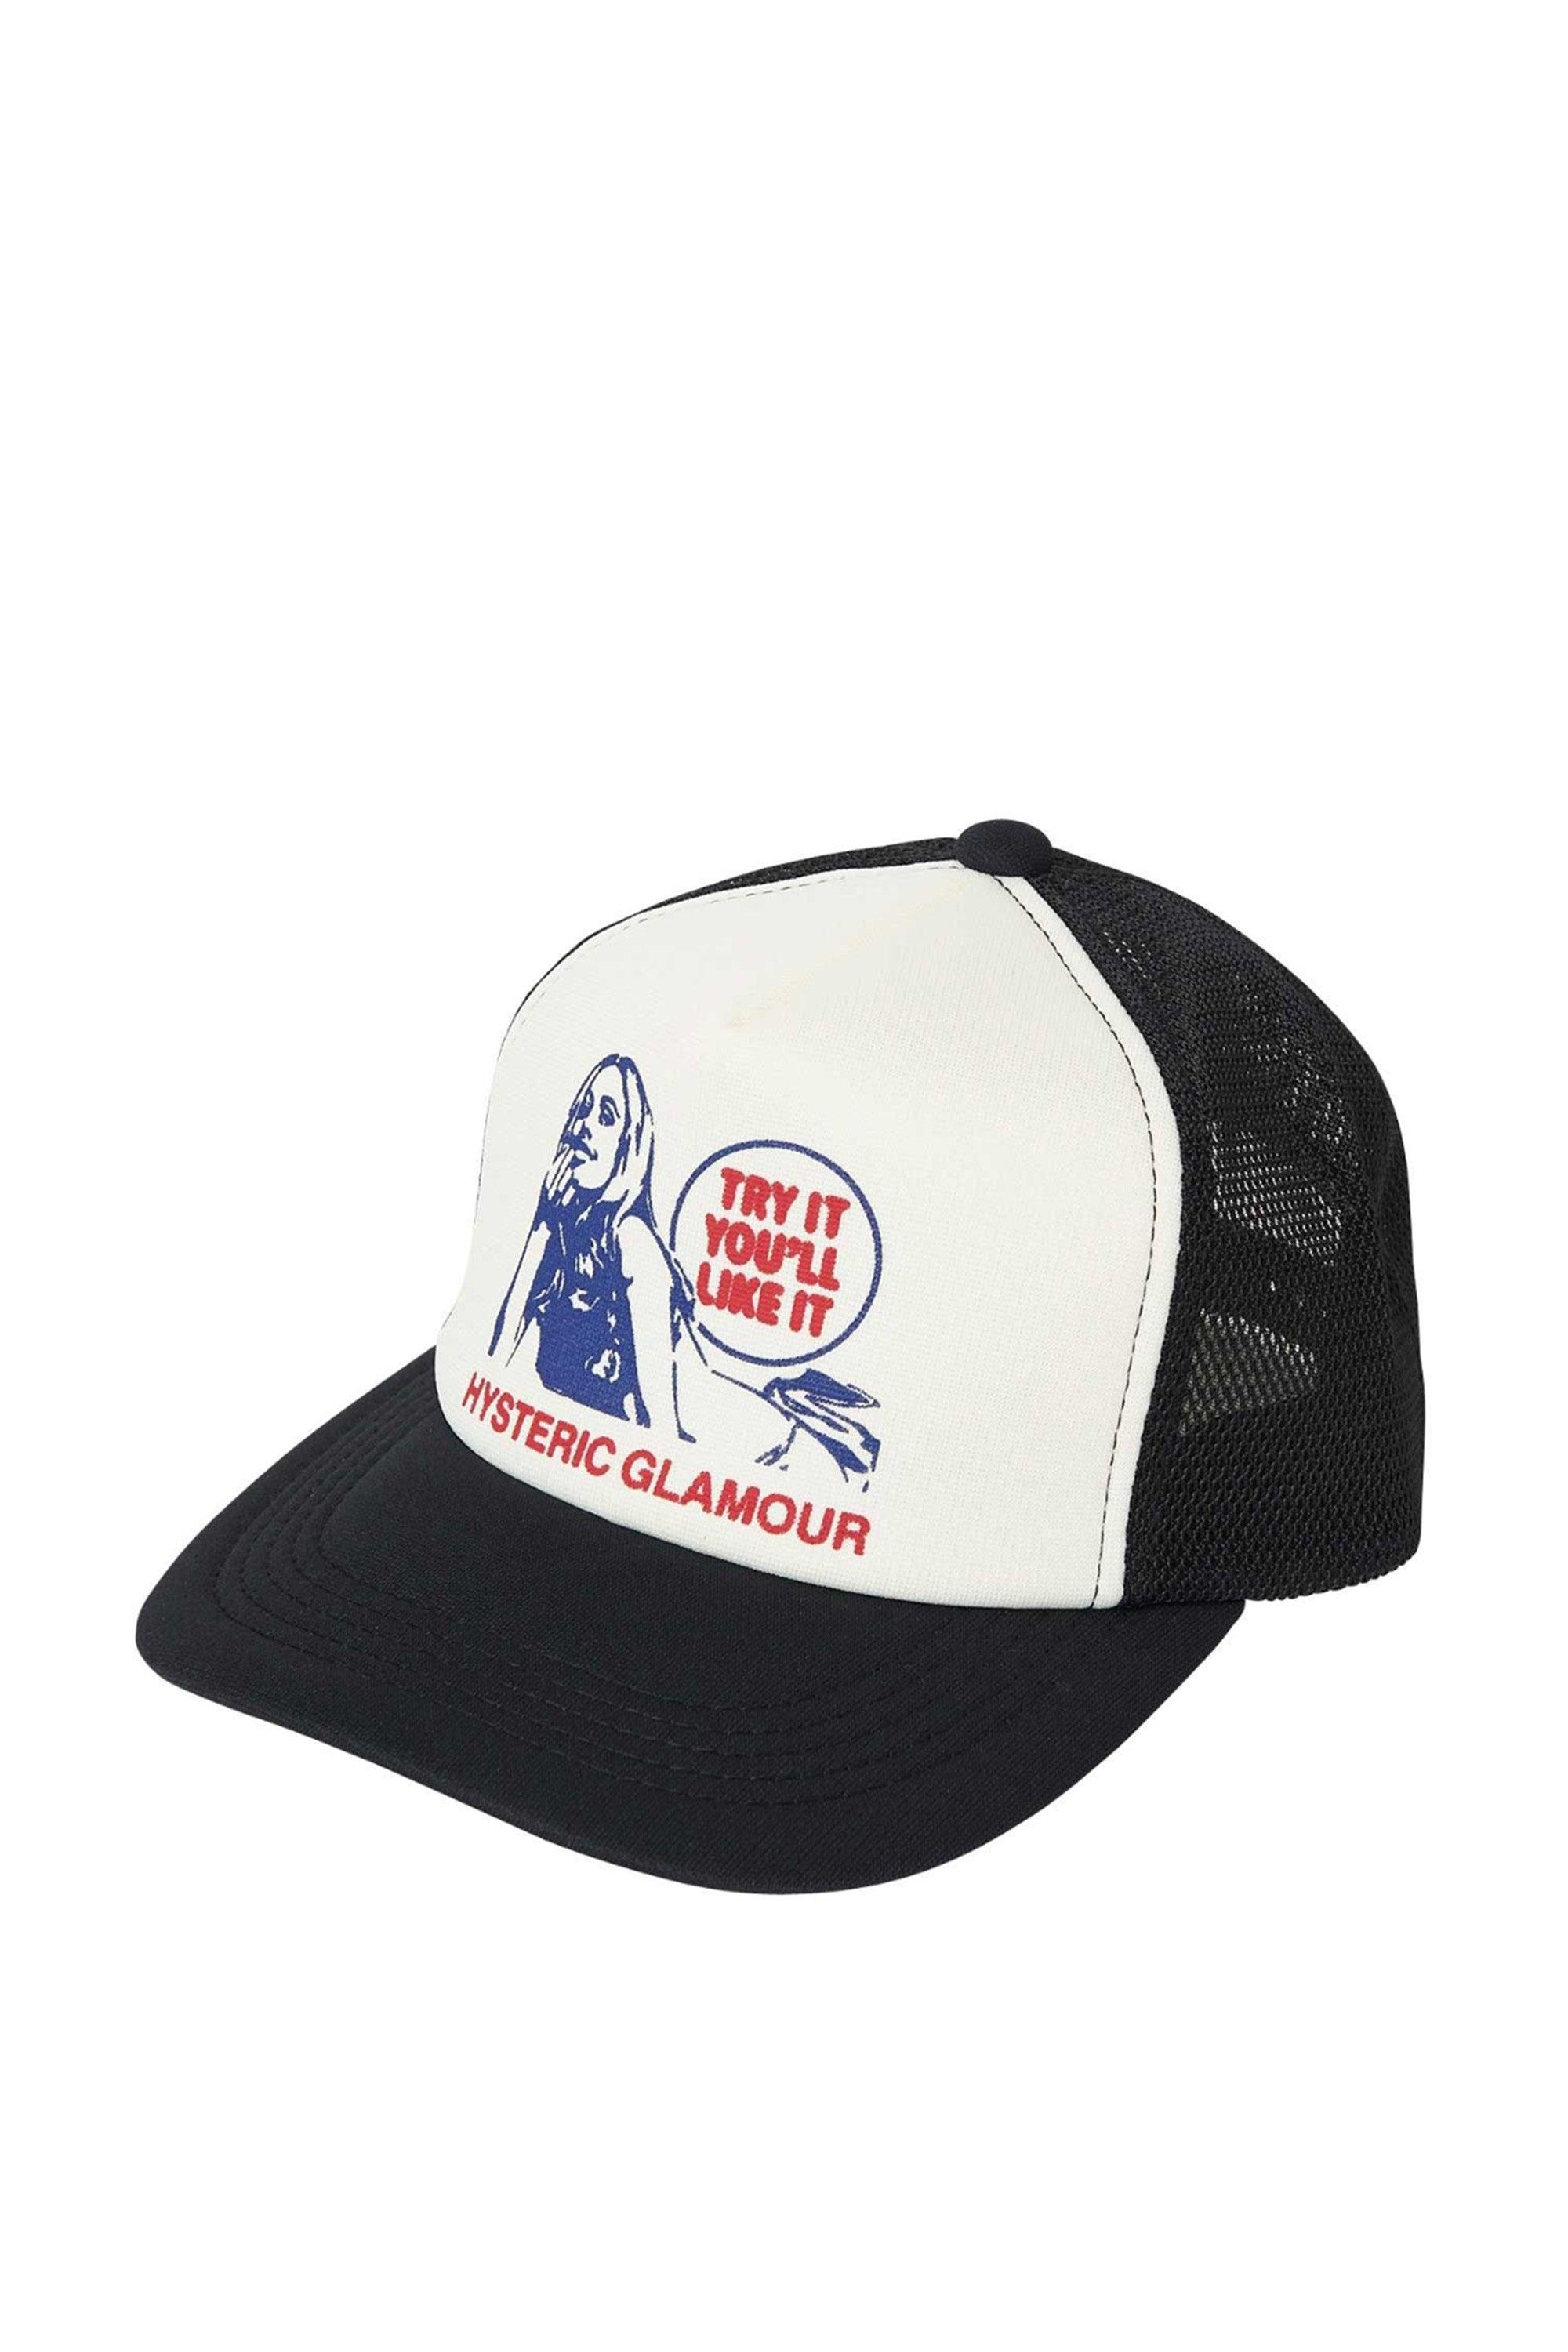 Hysteric Glamour Try It You'll Like It Mesh Cap in Black | Lyst